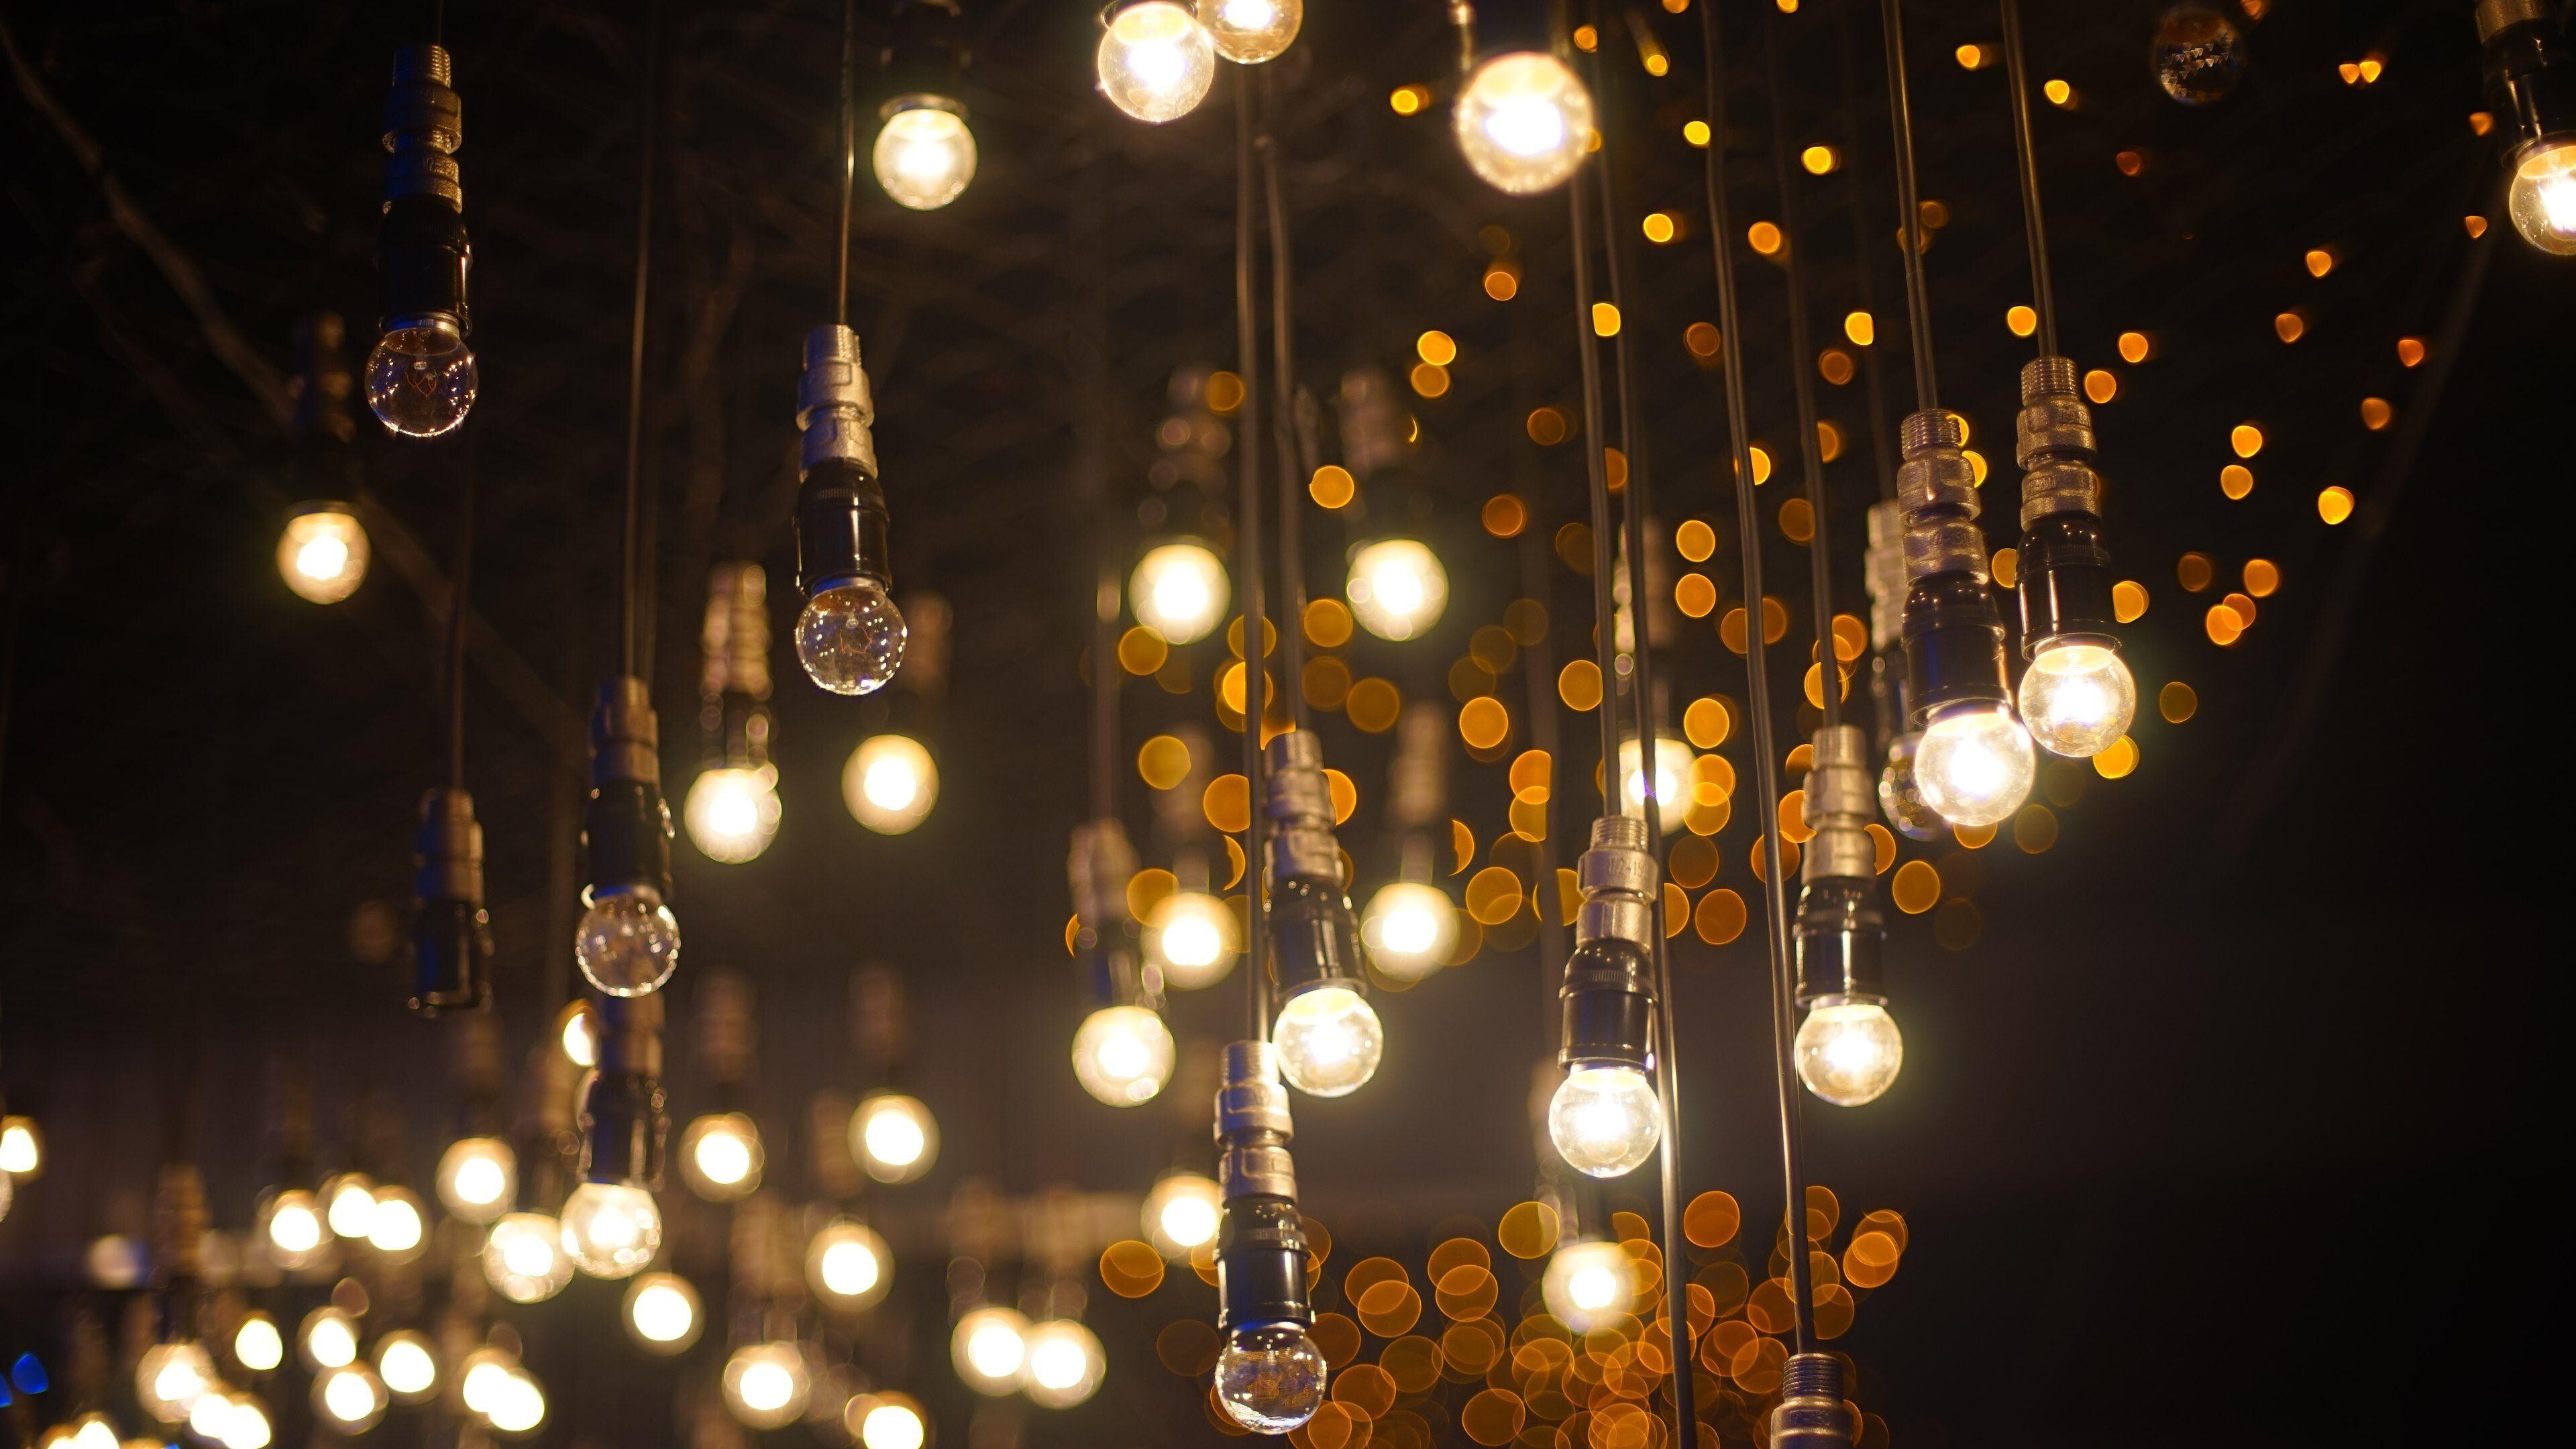 Gold Lights: Vintage Edison bulbs with cord, Party ornaments, Decorative lights and lamps. 3840x2160 4K Wallpaper.